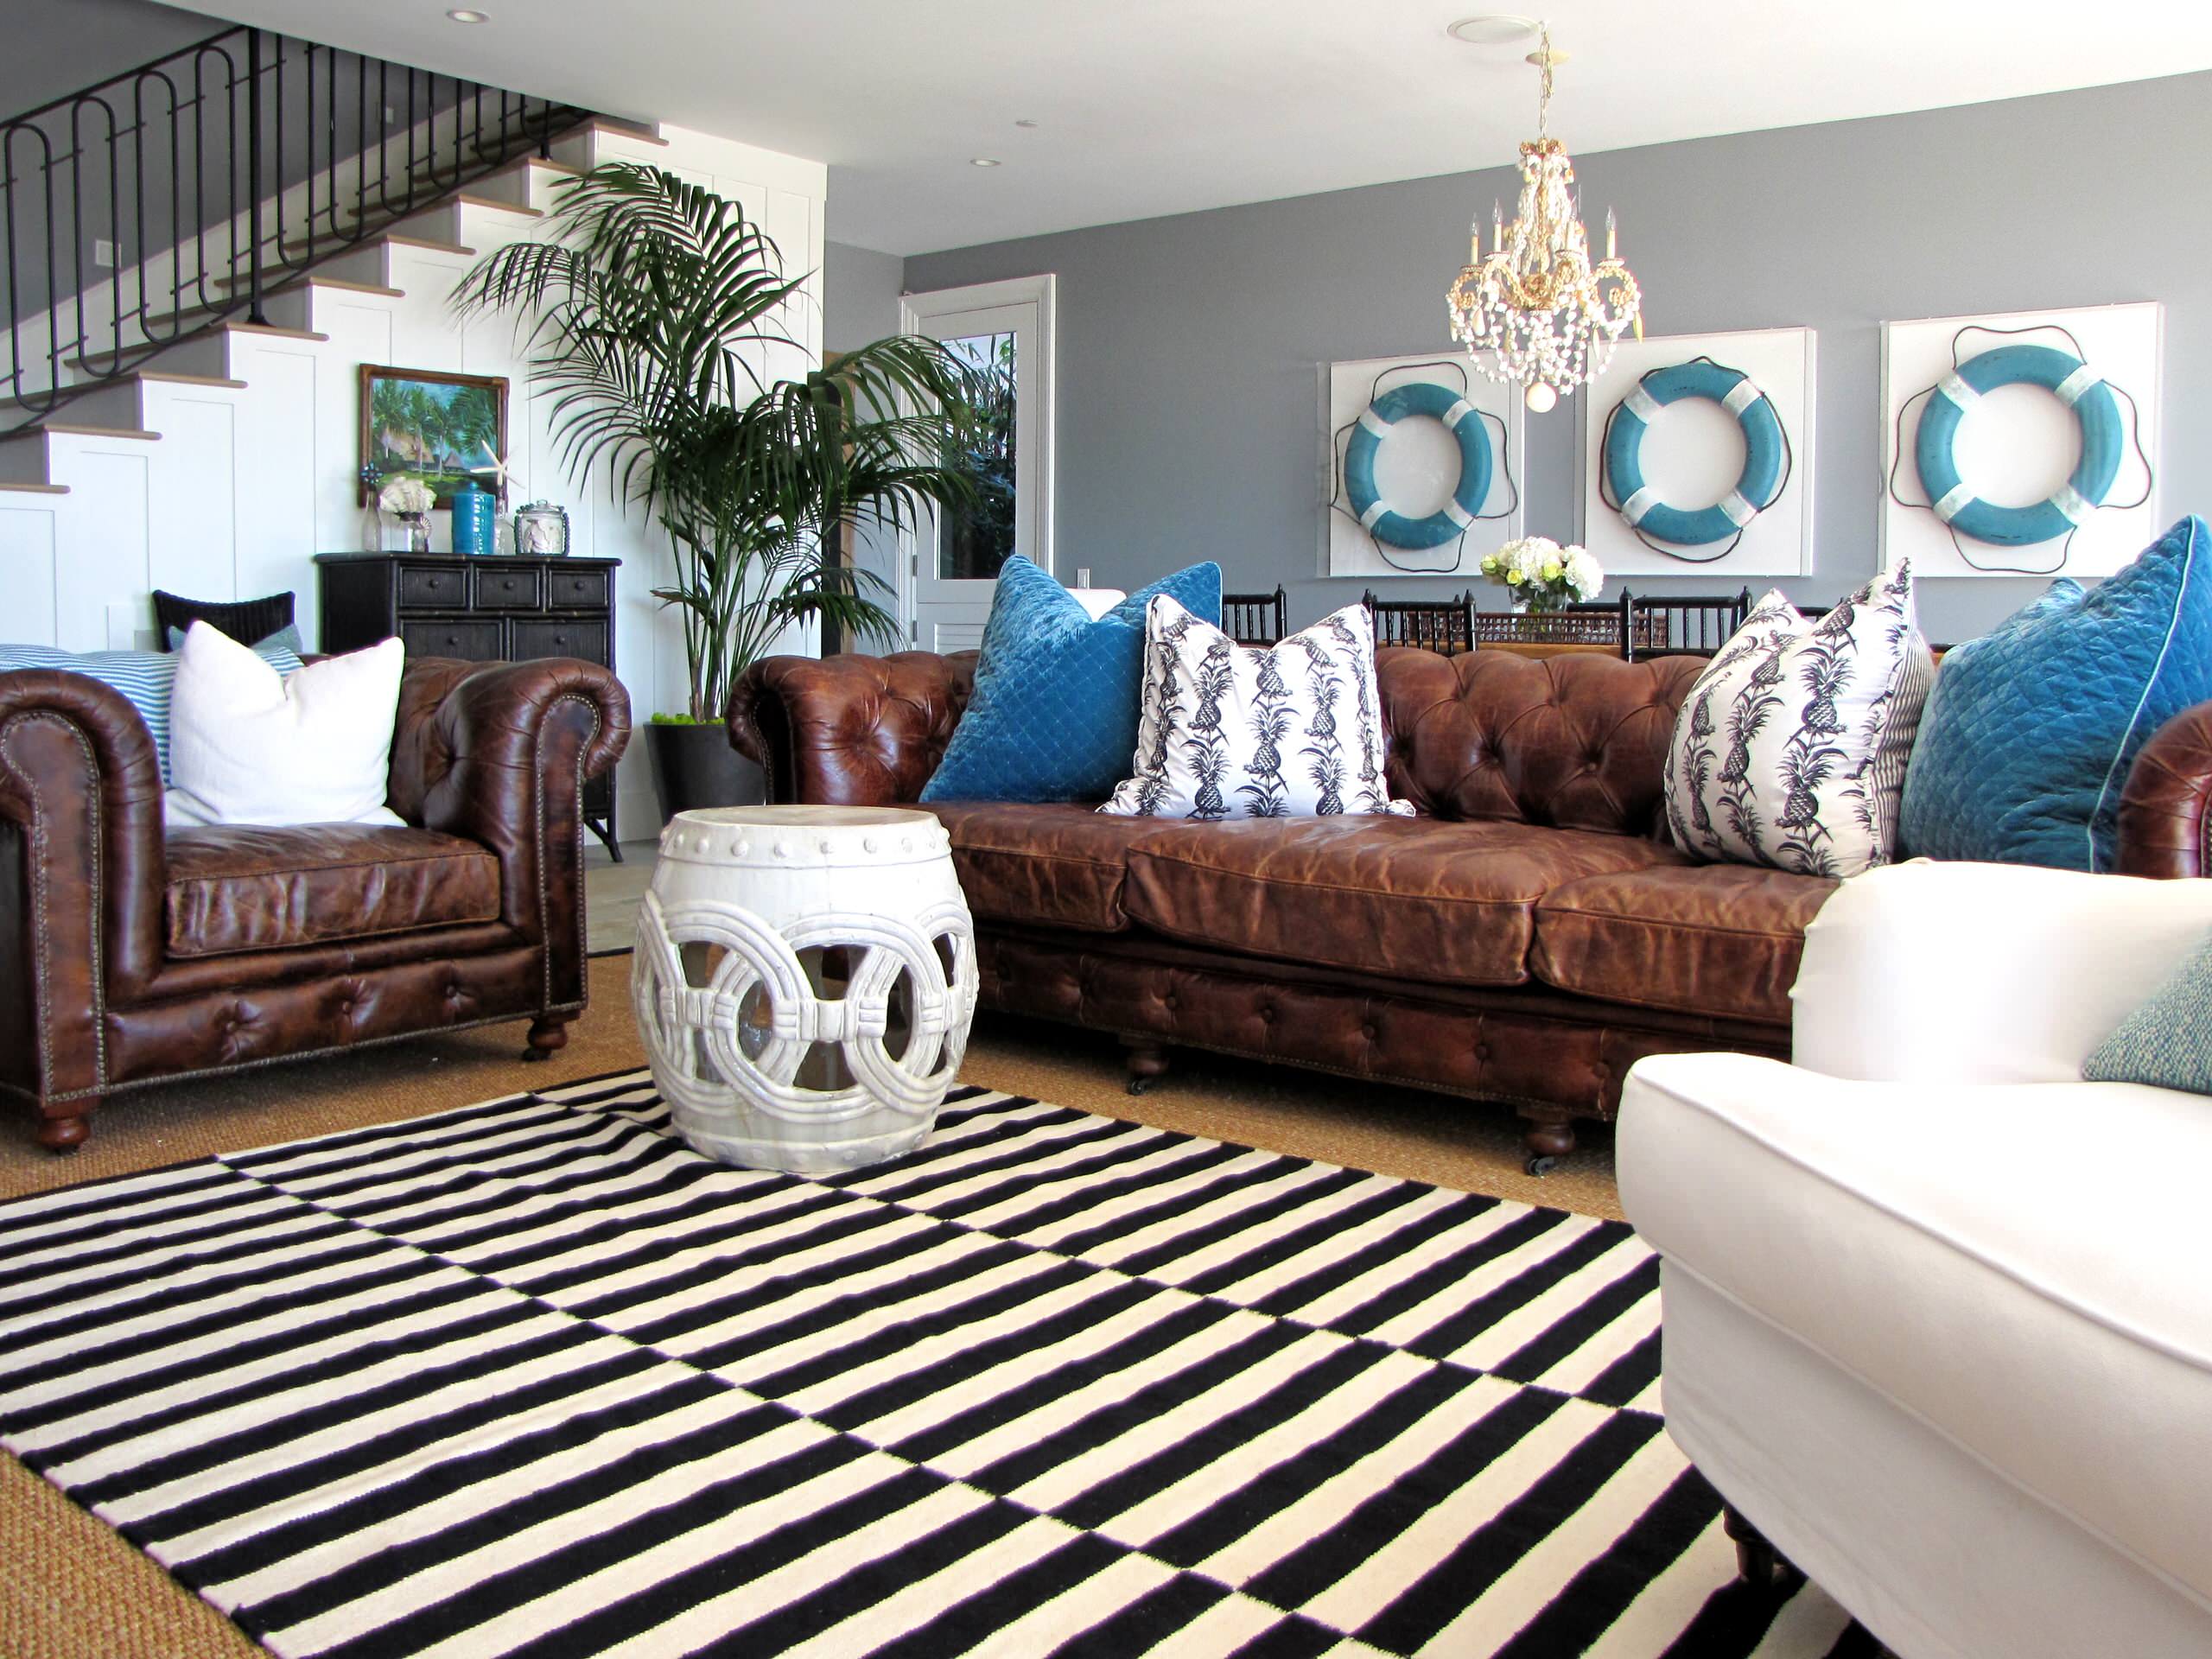 75 Beautiful Mixing Leather And Fabric Home Design Ideas & Designs | Houzz  AU